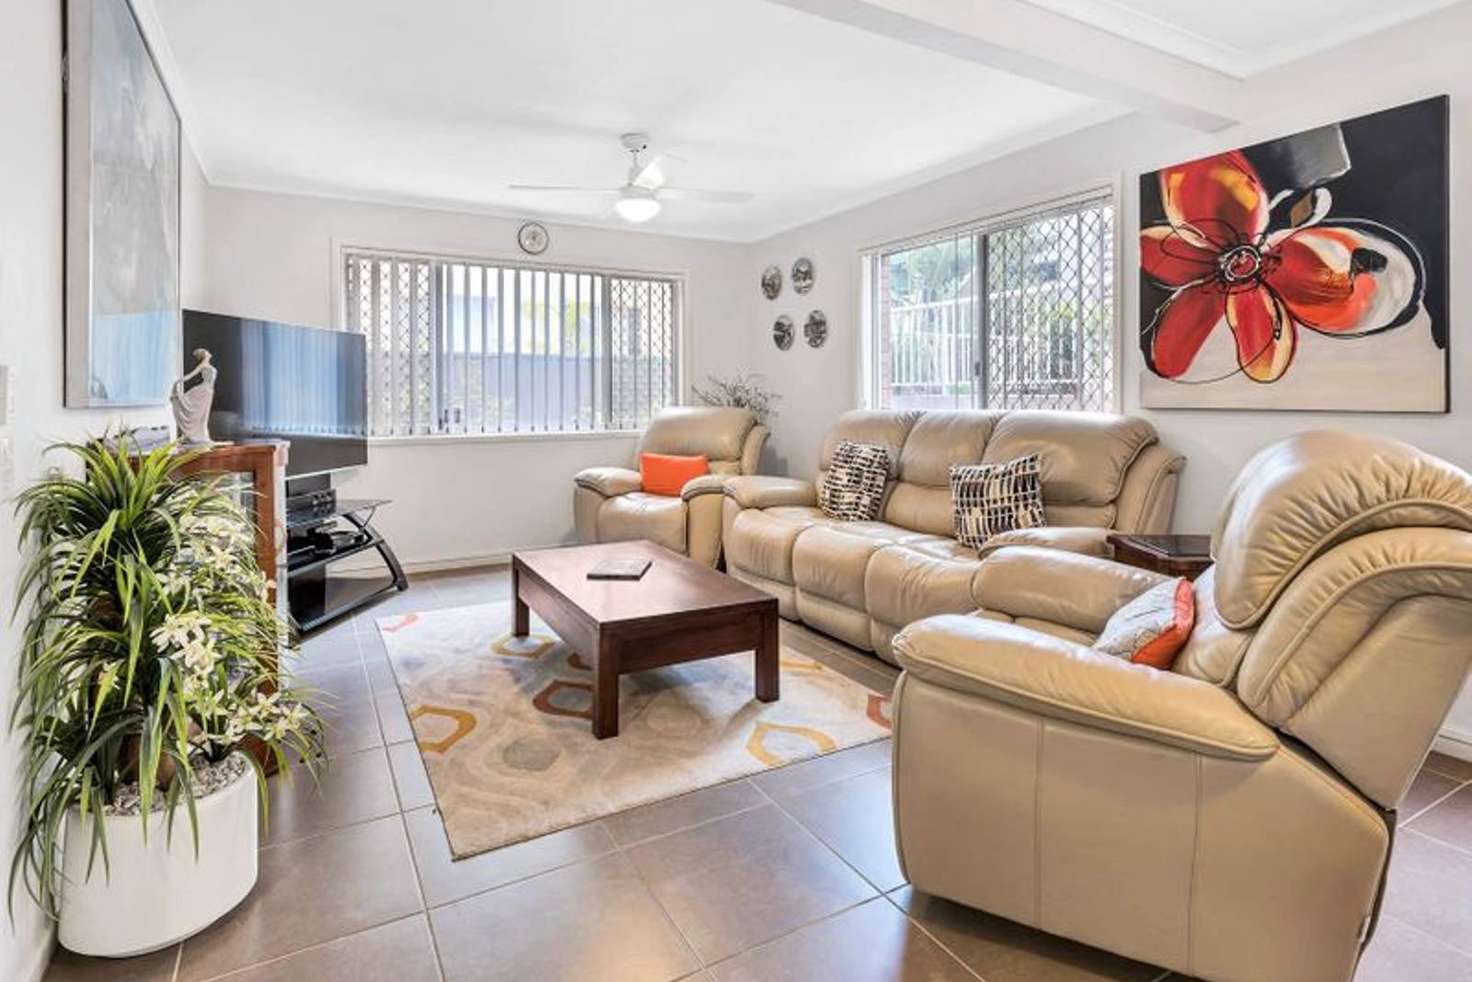 Main view of Homely apartment listing, 2/11 Illawong Street, Chevron Island QLD 4217